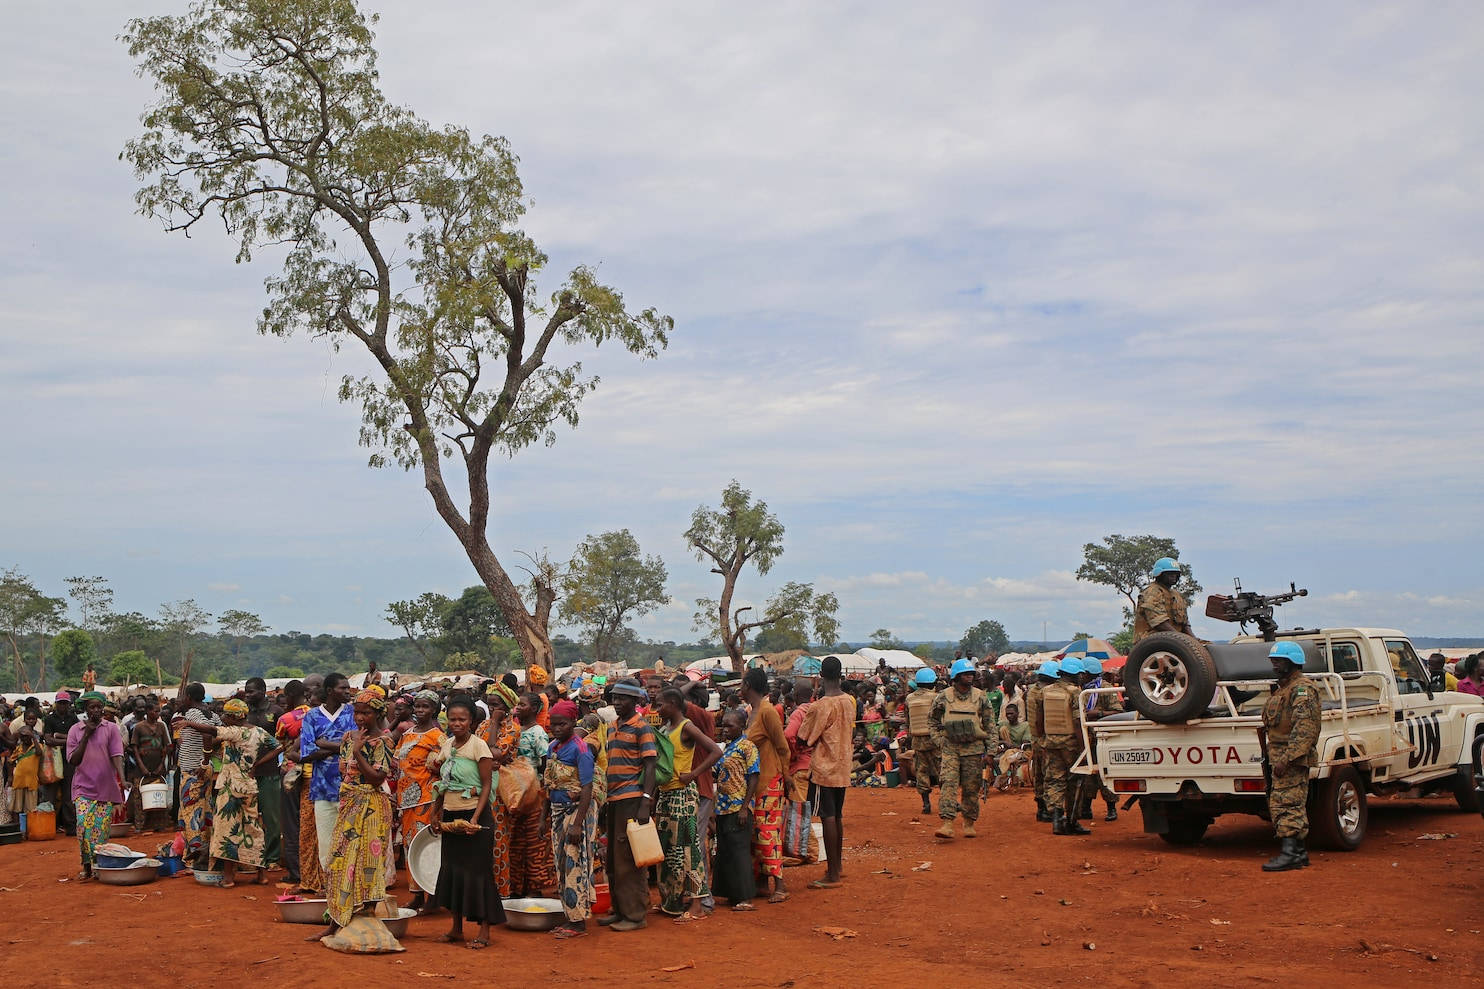 Crowd In Central African Republic Background